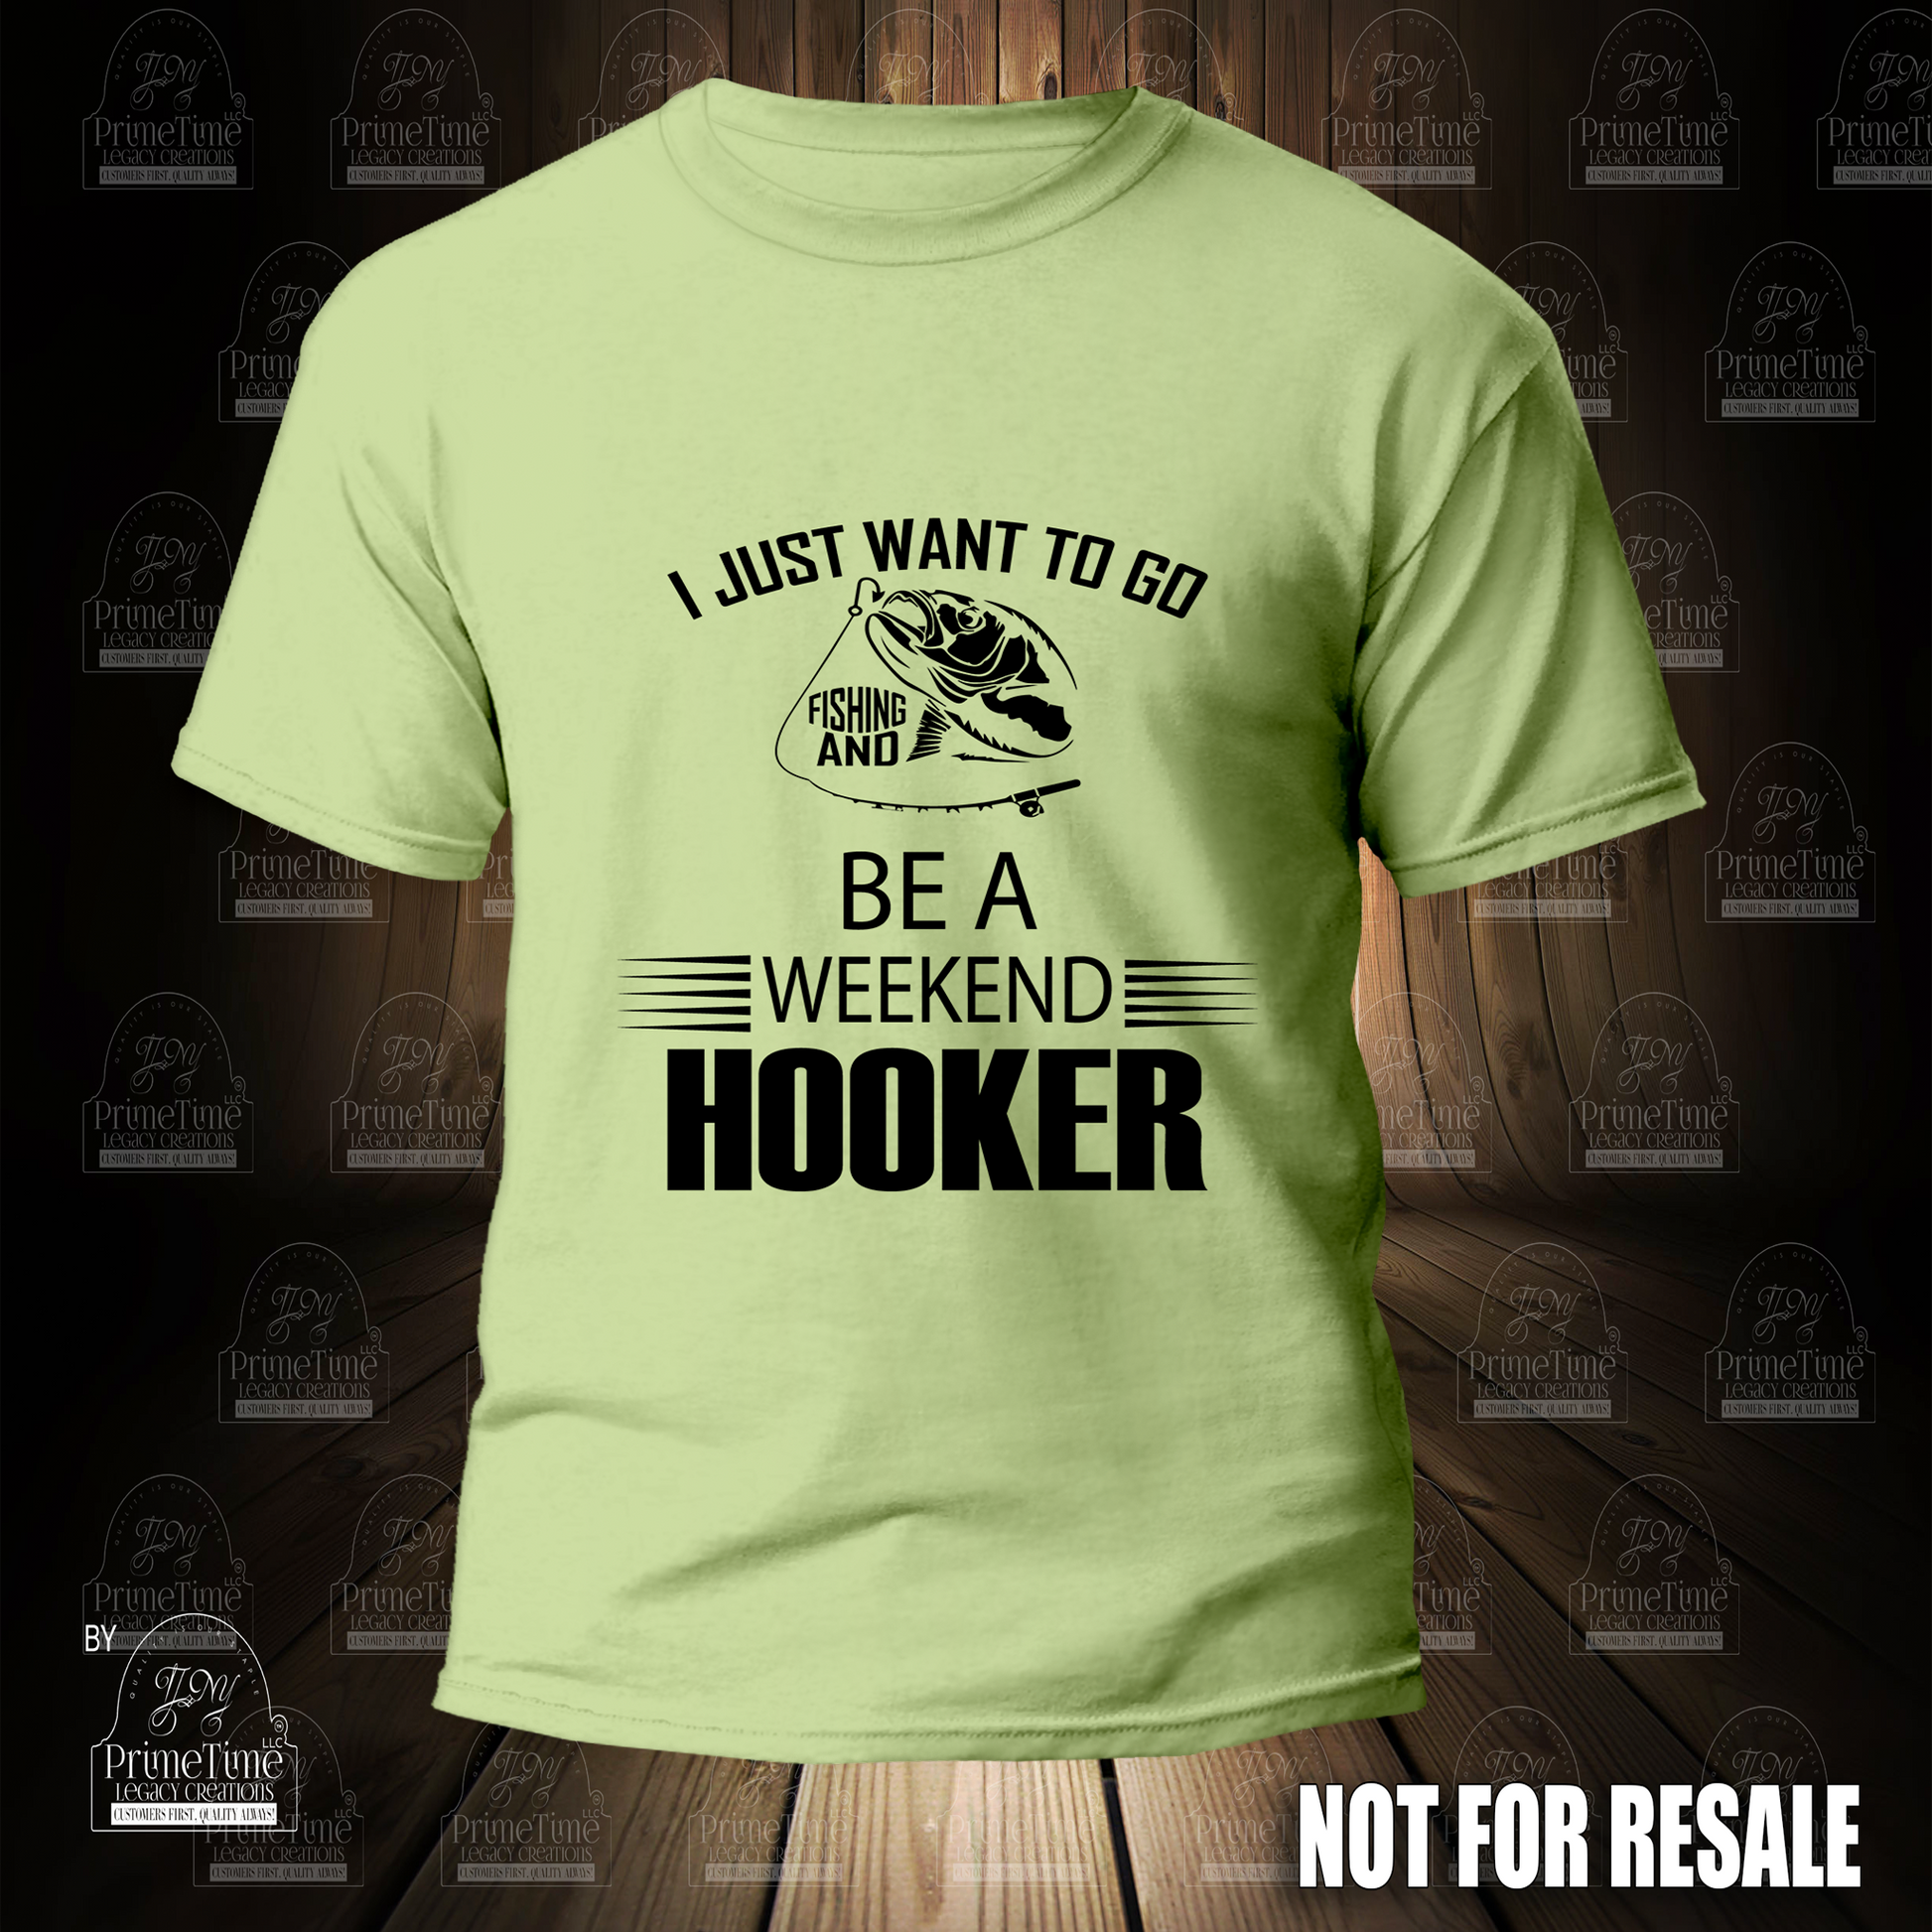 Im A Hooker On The Weekends Funny Dad Fishing Gear Gift Sweat